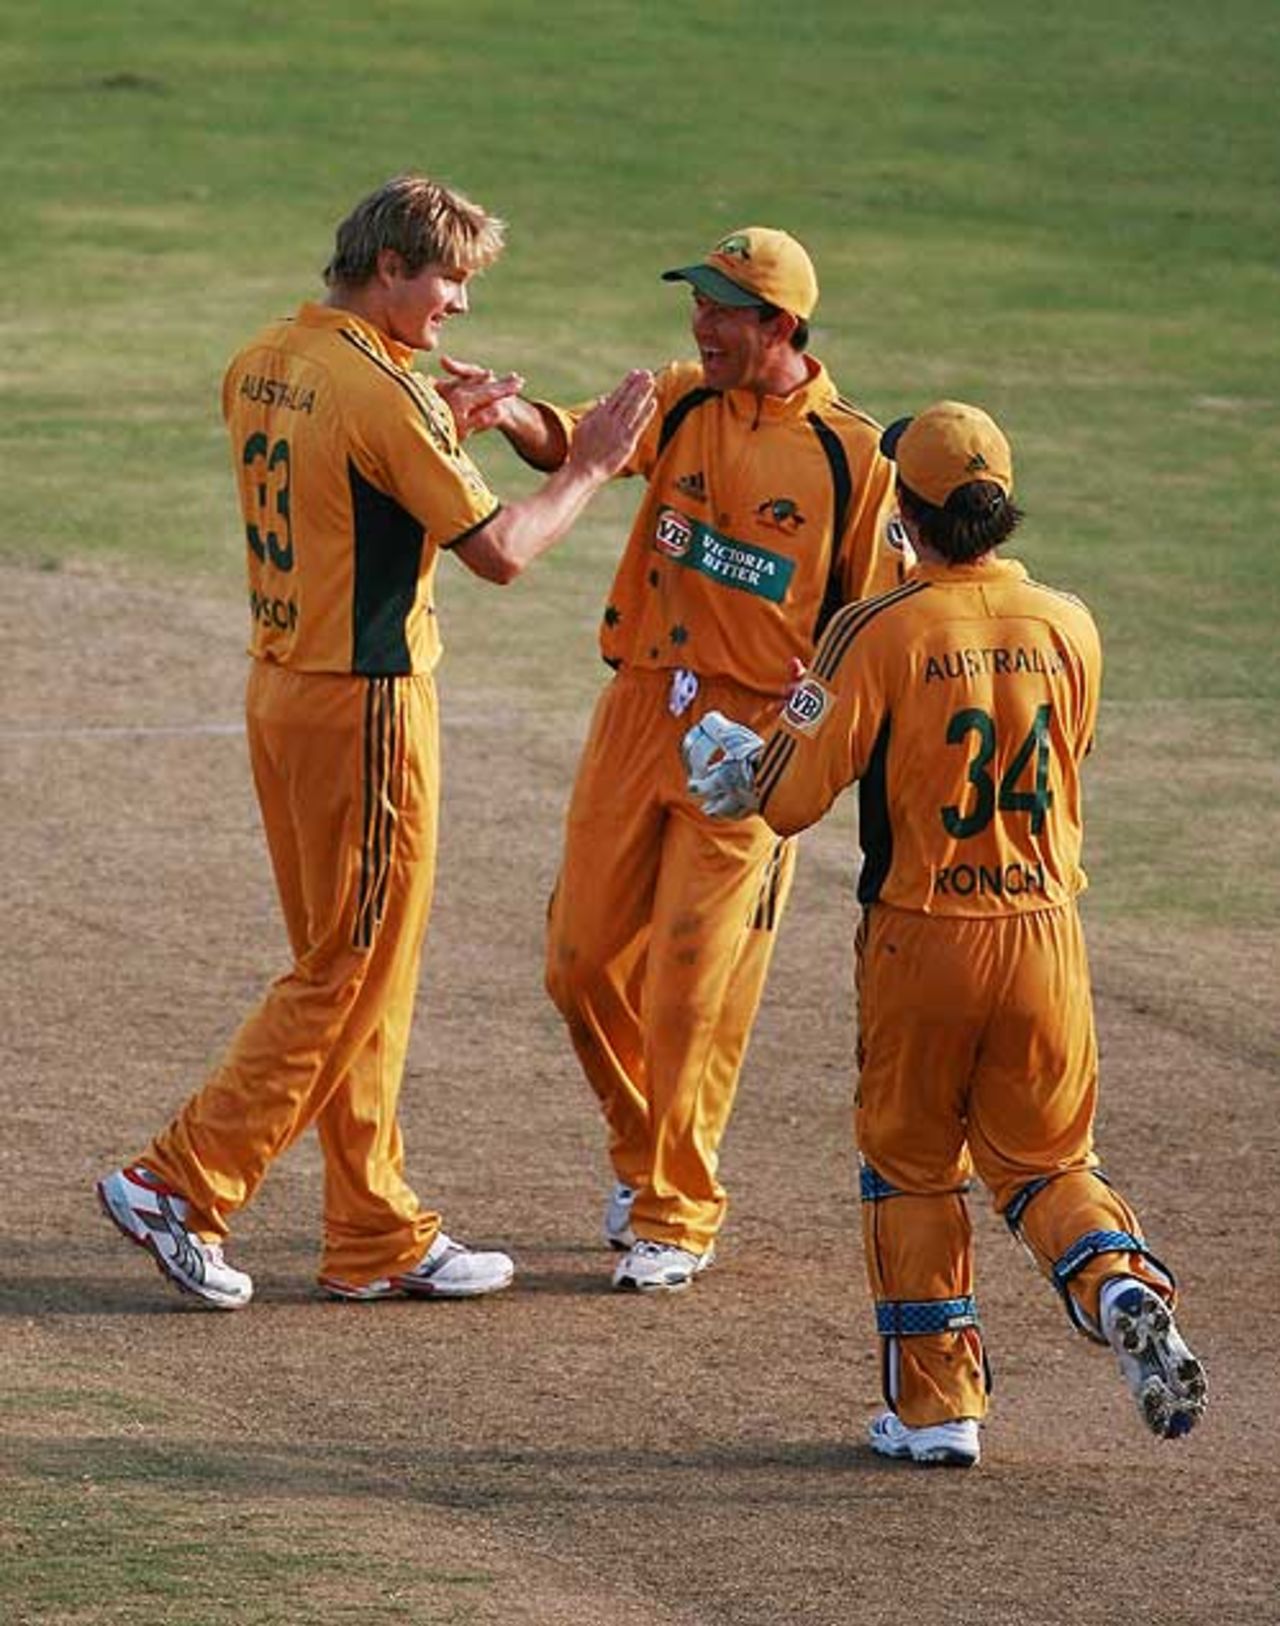 Shane Watson gets congratulated for one of his two wickets, West Indies v Australia, 2nd ODI, Grenada, June 27, 2008